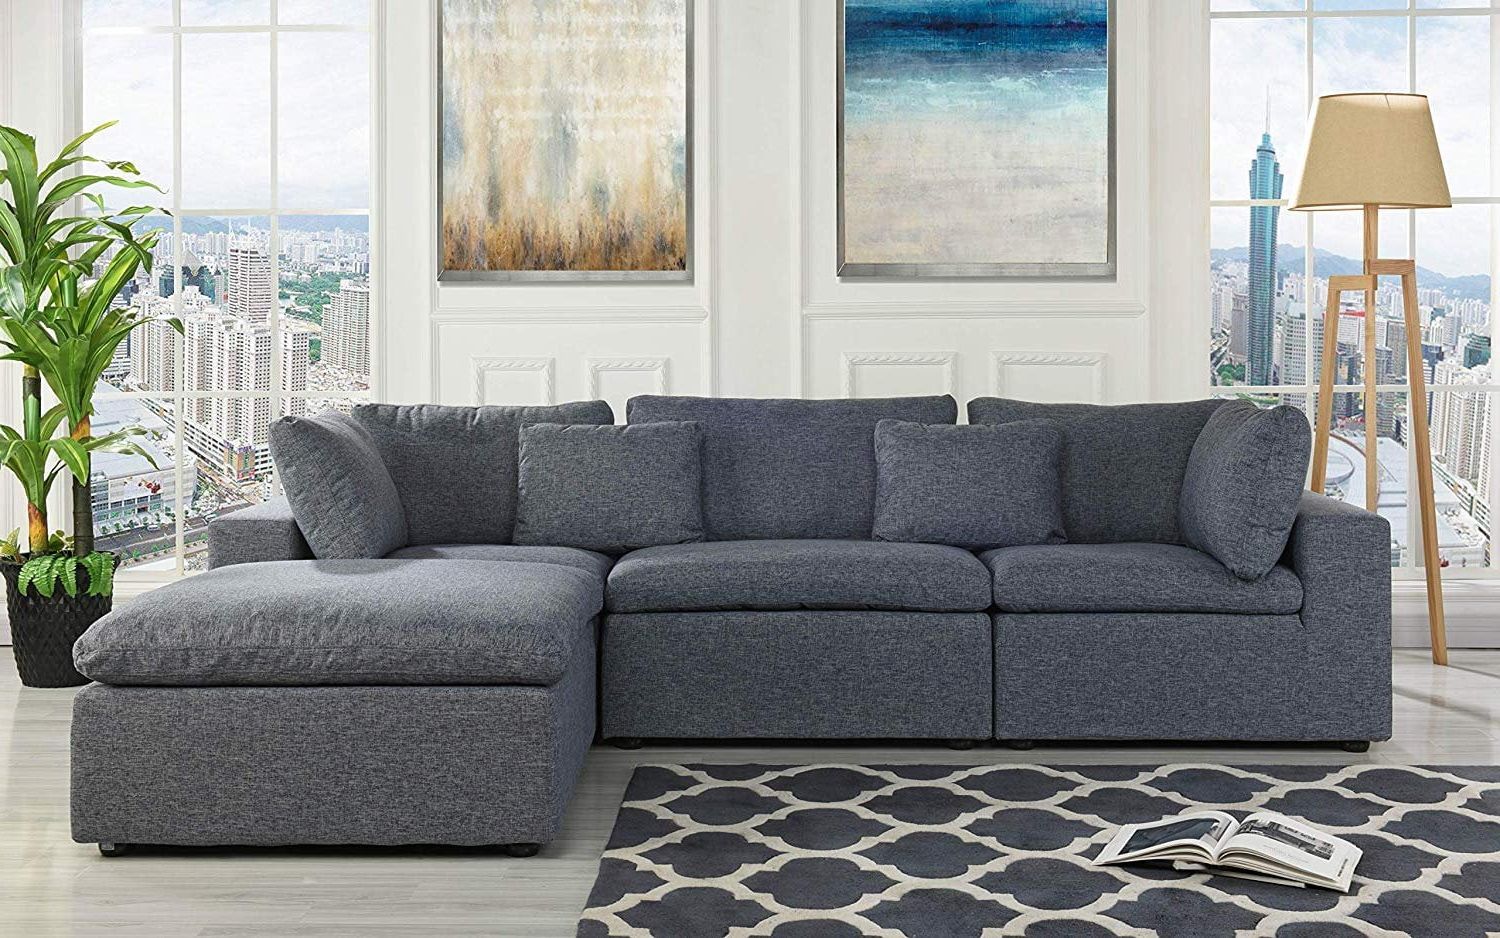 Classic Large Linen Fabric Sectional Sofa, L Shape Couch With Wide With Regard To Most Current Gray Linen Sofas (View 3 of 15)